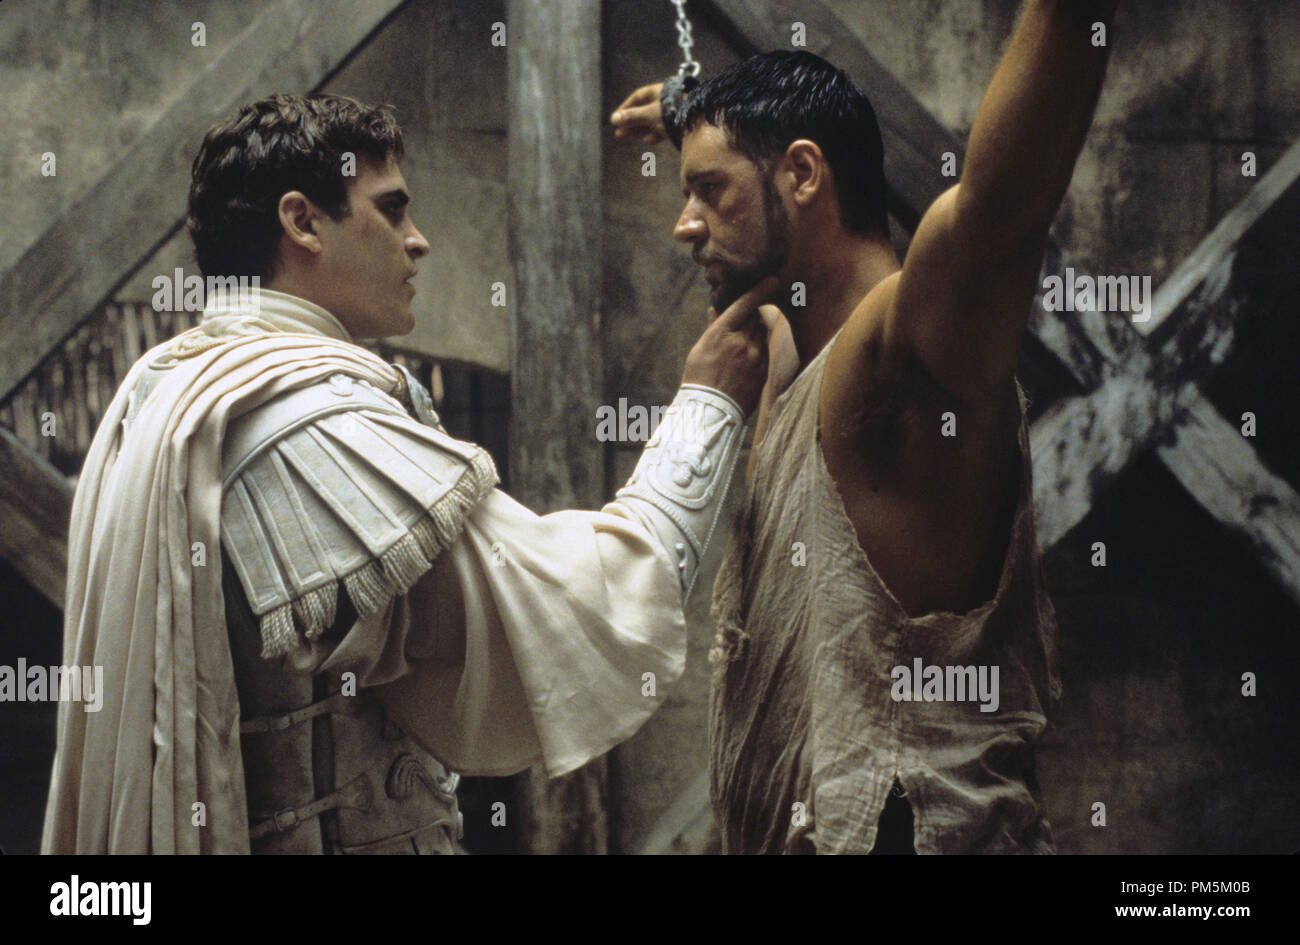 Film Still / Publicity Stills from 'Gladiator' Joaquin Phoenix, Russell Crowe © 2000 Universal  Photo Credit: Jaap Buitendijk  File Reference # 30846505THA  For Editorial Use Only -  All Rights Reserved Stock Photo